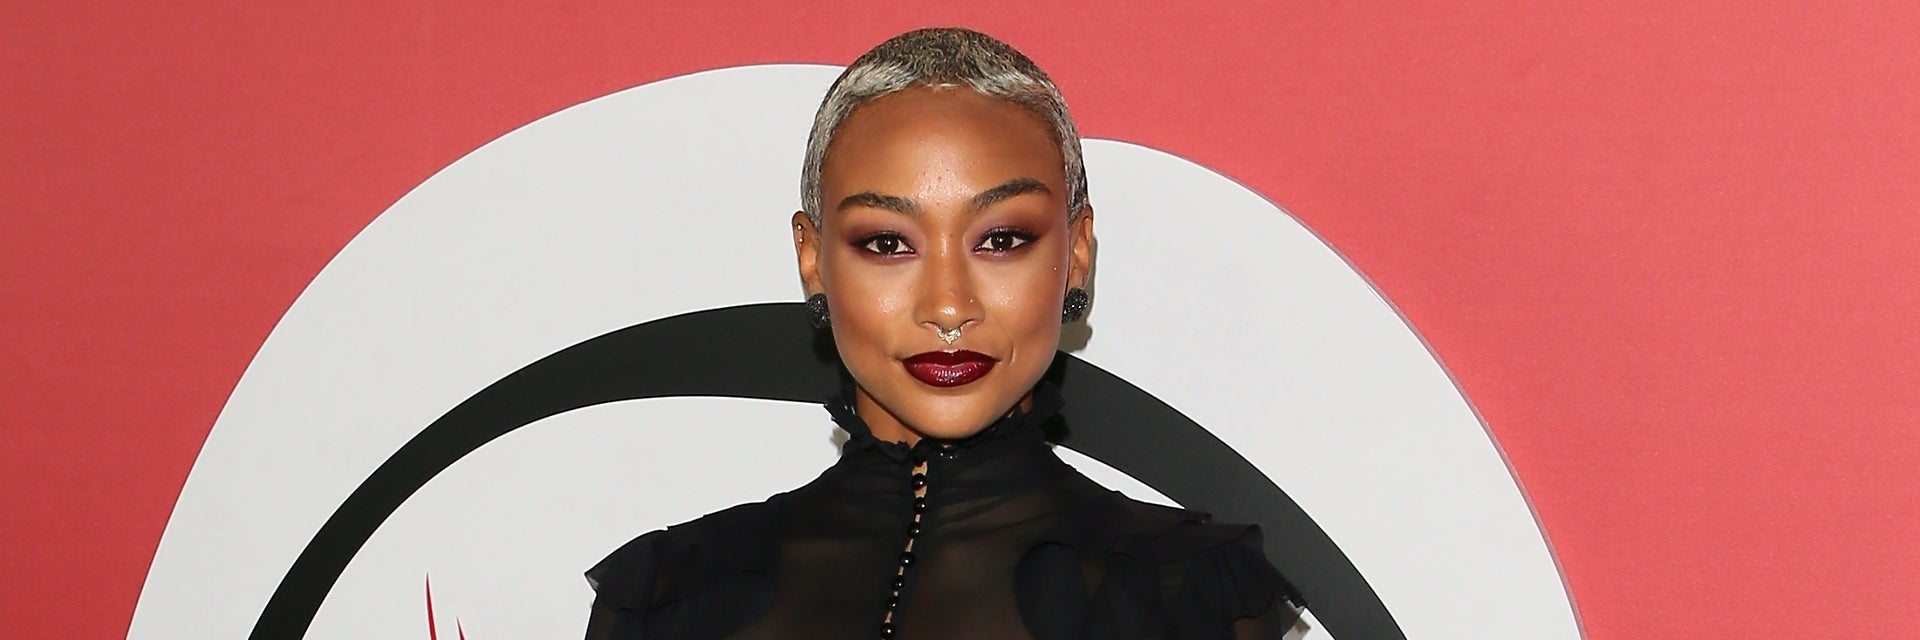 'Sabrina' Star Tati Gabrielle Is Finally Coming Into Her Own